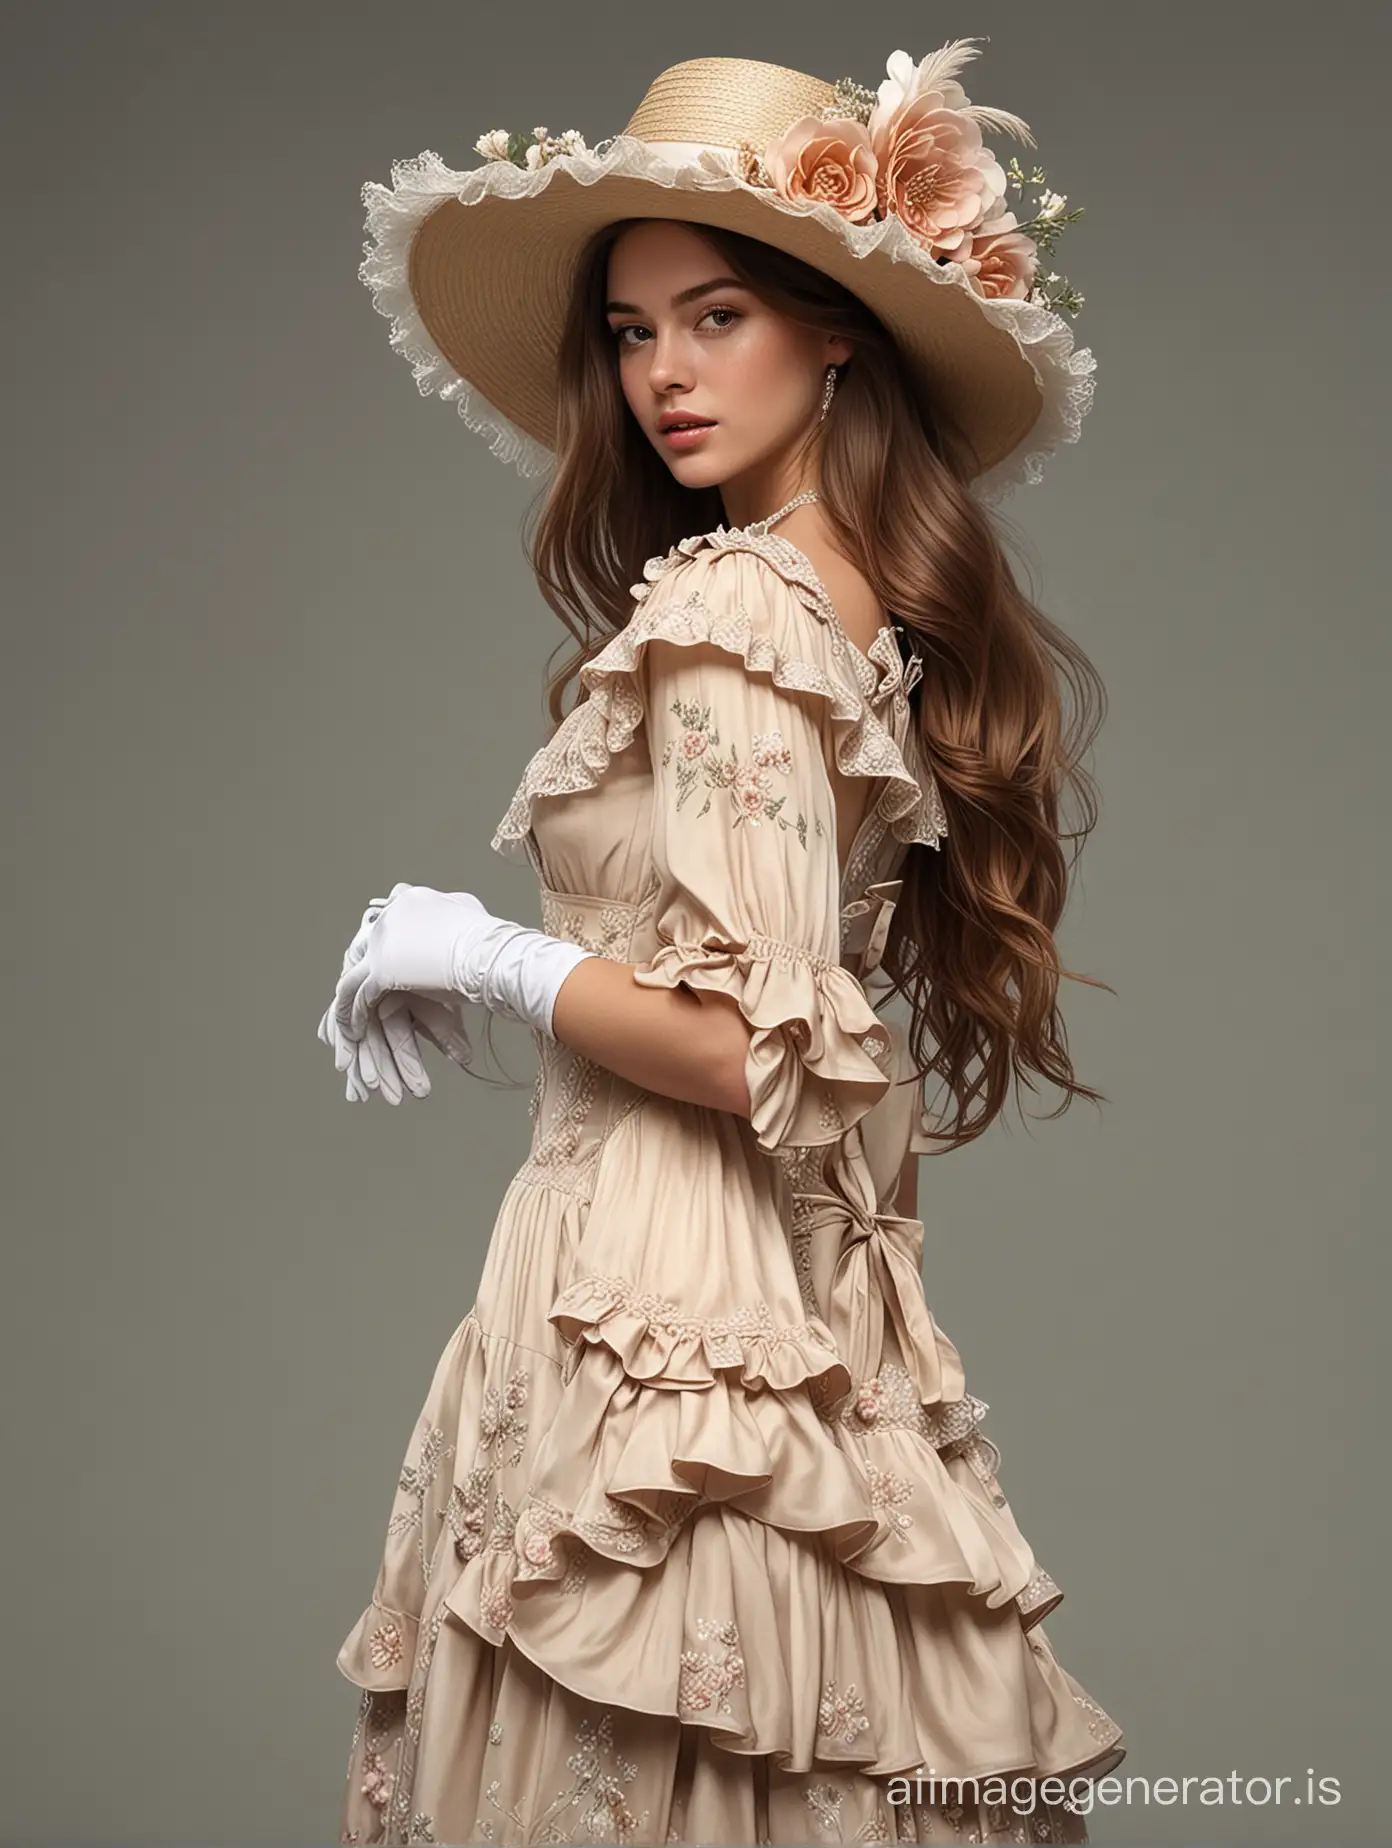 A single girl standing elegantly, dressed in a hat, a flowing dress adorned with frills, and gloves. She has long brown hair cascading down her back and wears a necktie with a delicate flower accent. The composition captures her full body, highlighting the intricate details of her attire, hyper realistic, realistic face, high detailed